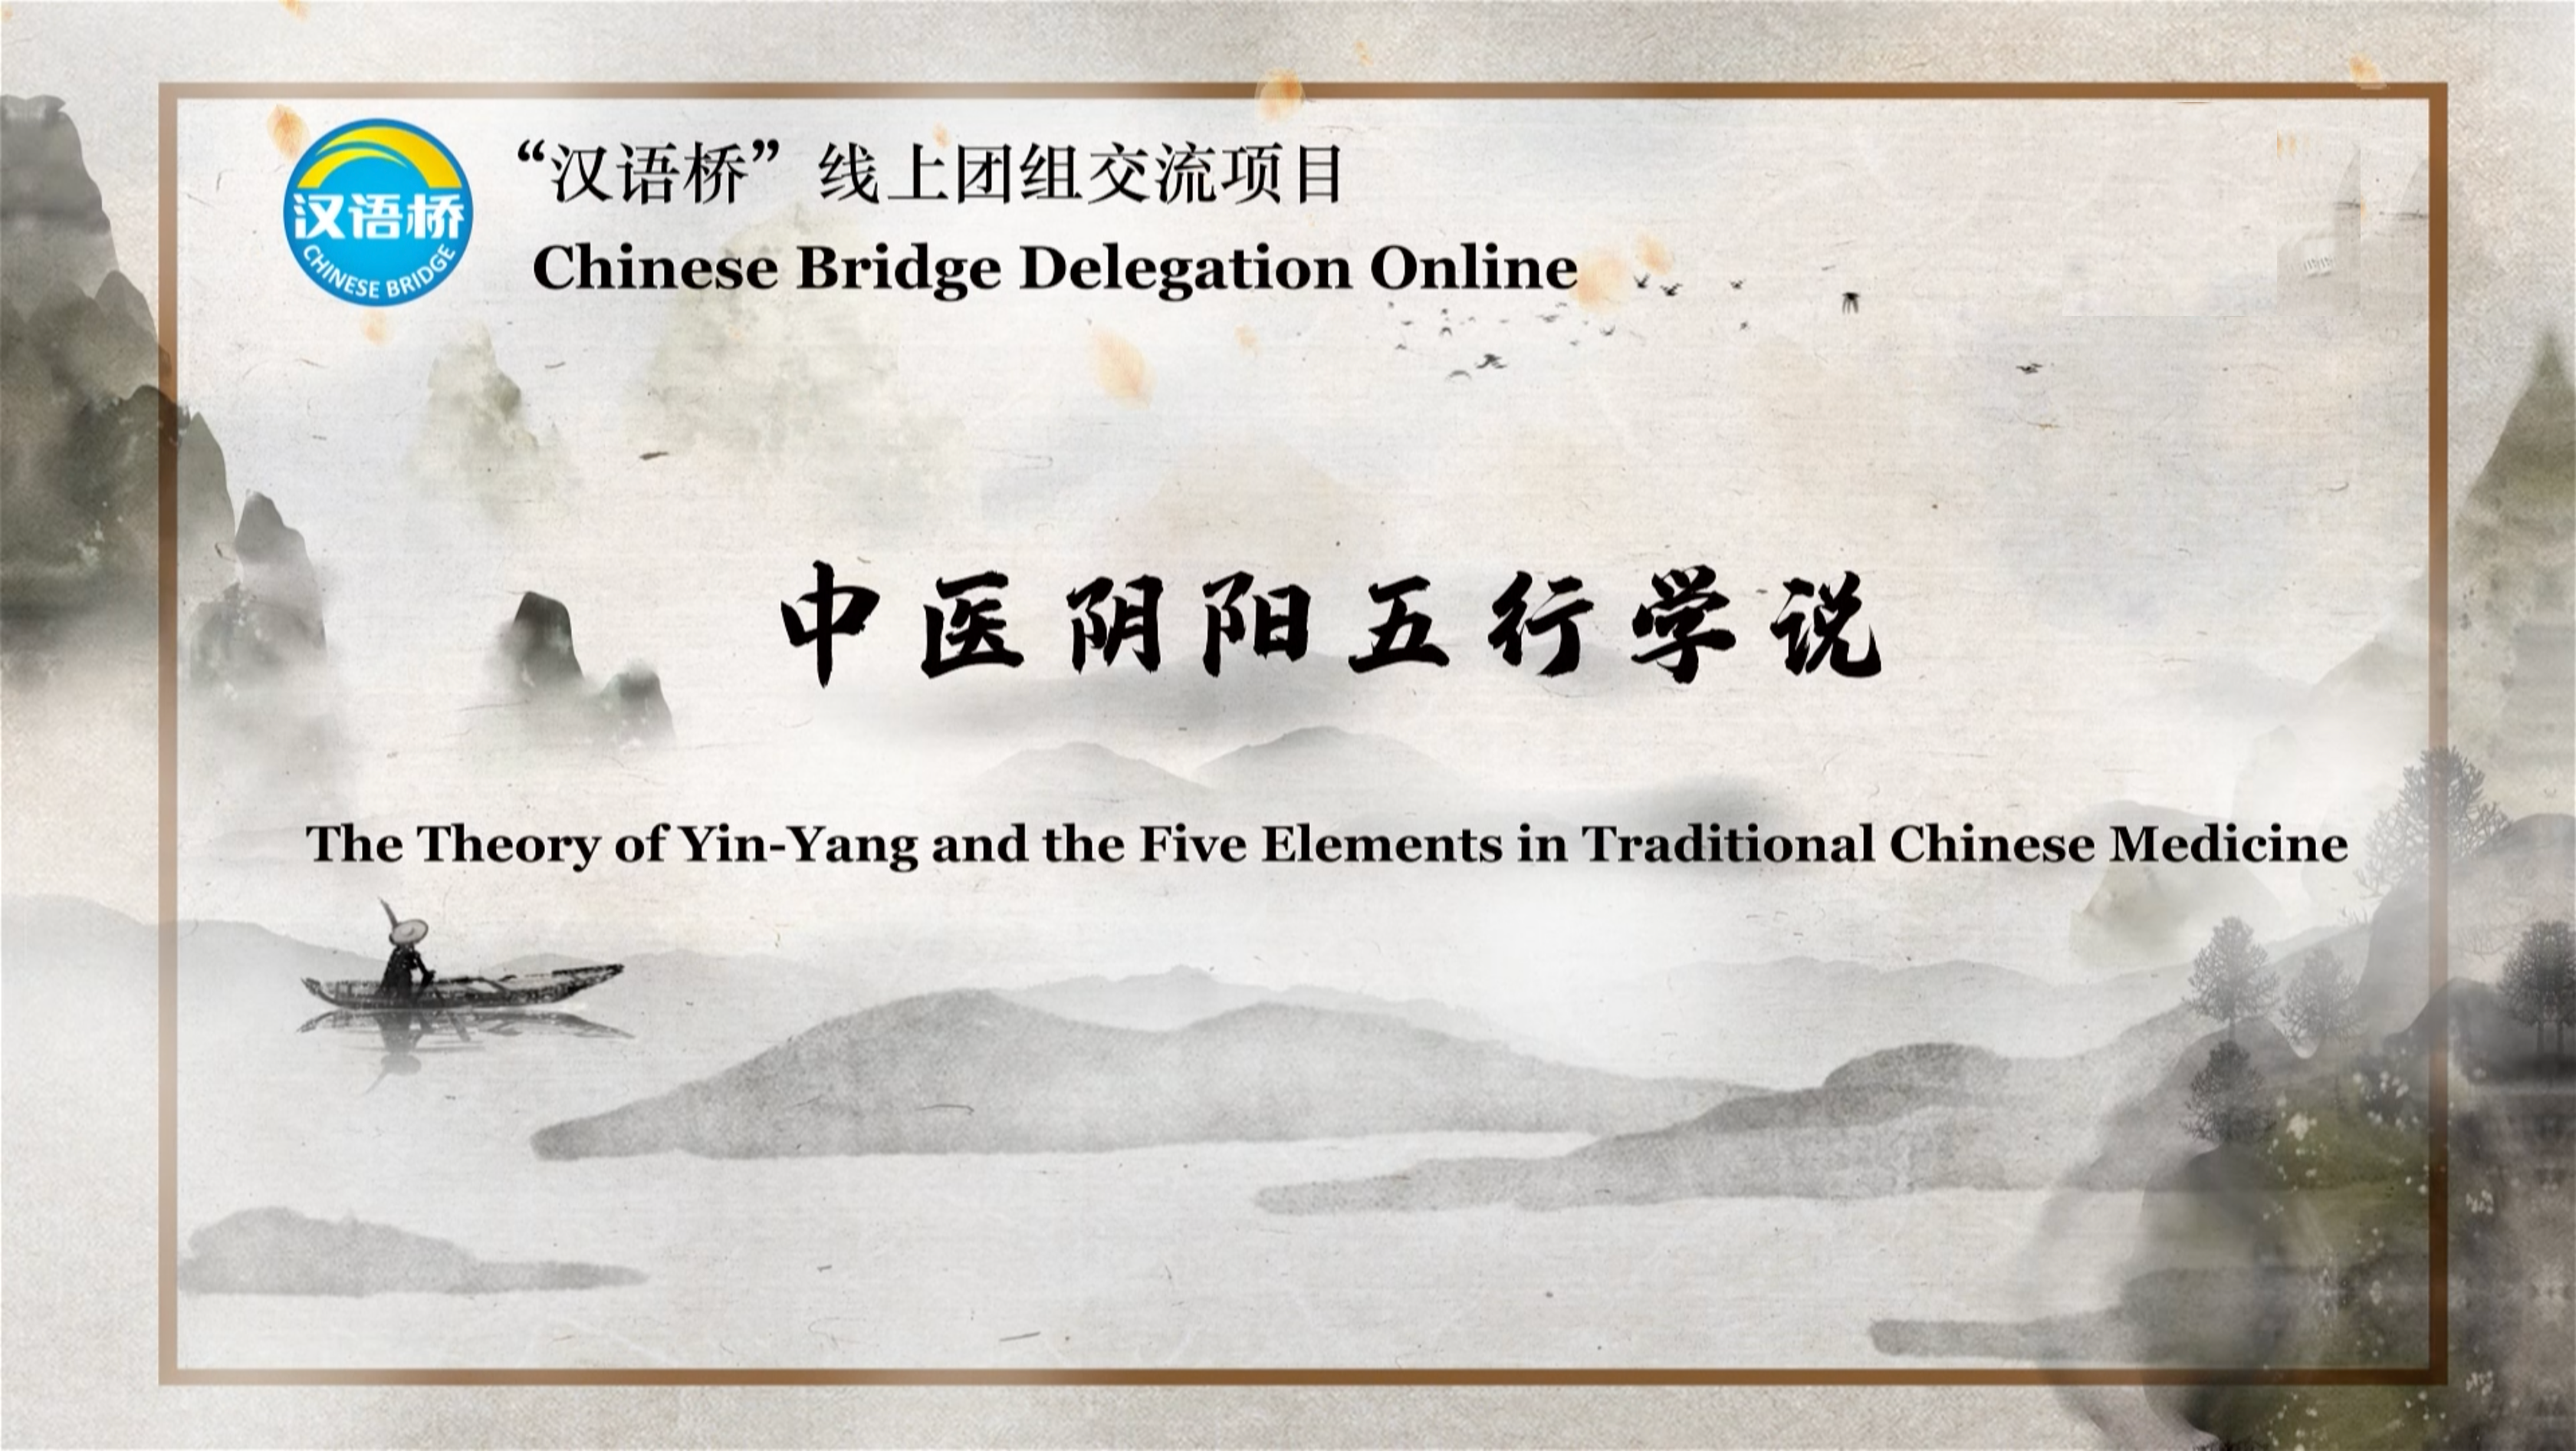 the Theory of Yin-Yang and the Five Elements in Traditional Chinese Medicine